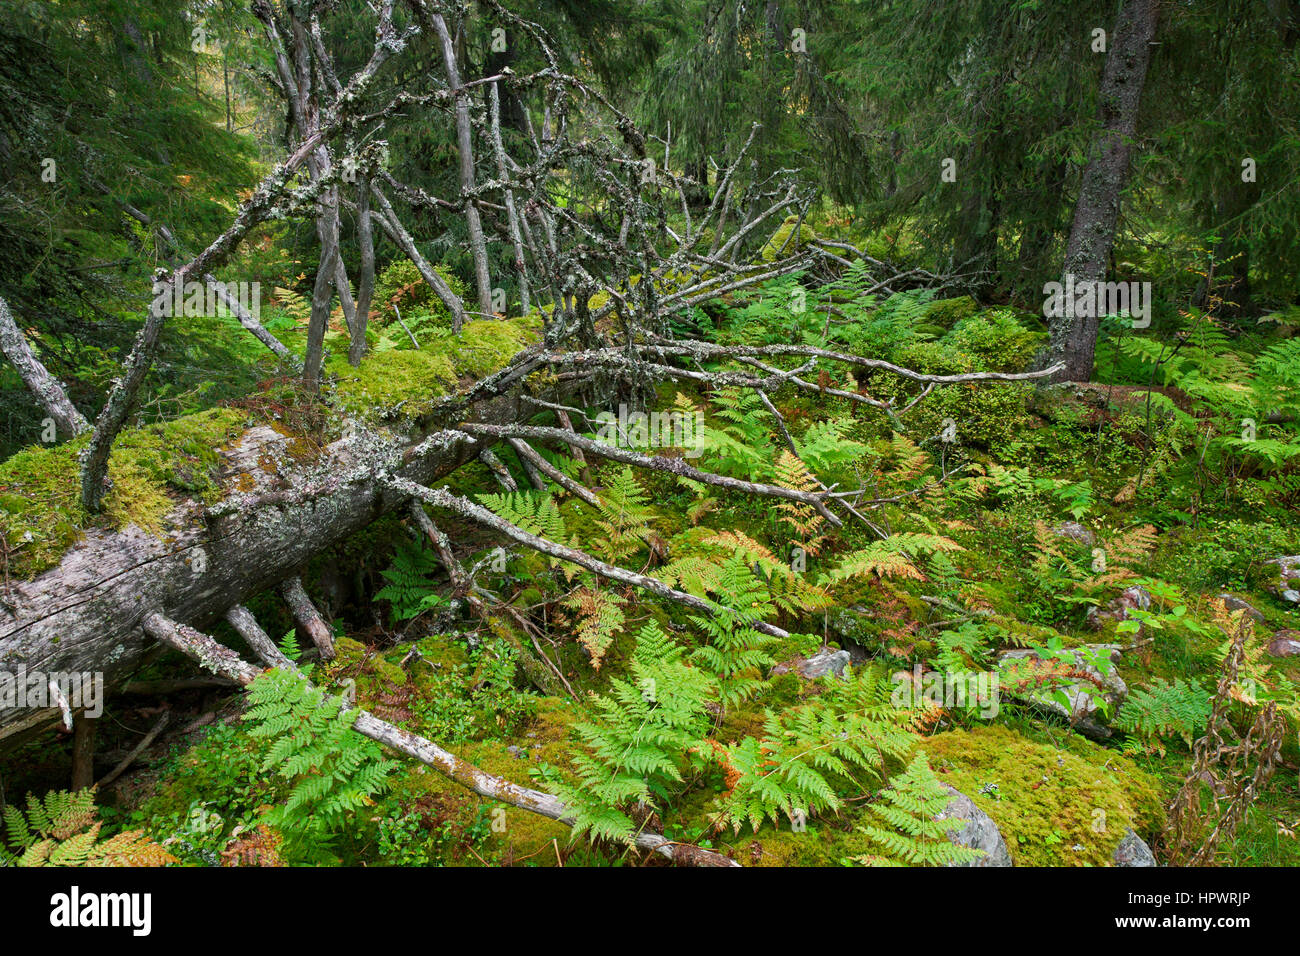 Fallen tree trunk covered in moss left to rot in old-growth forest / ancient woodland as dead wood, habitat for invertebrates, mosses and fungi Stock Photo